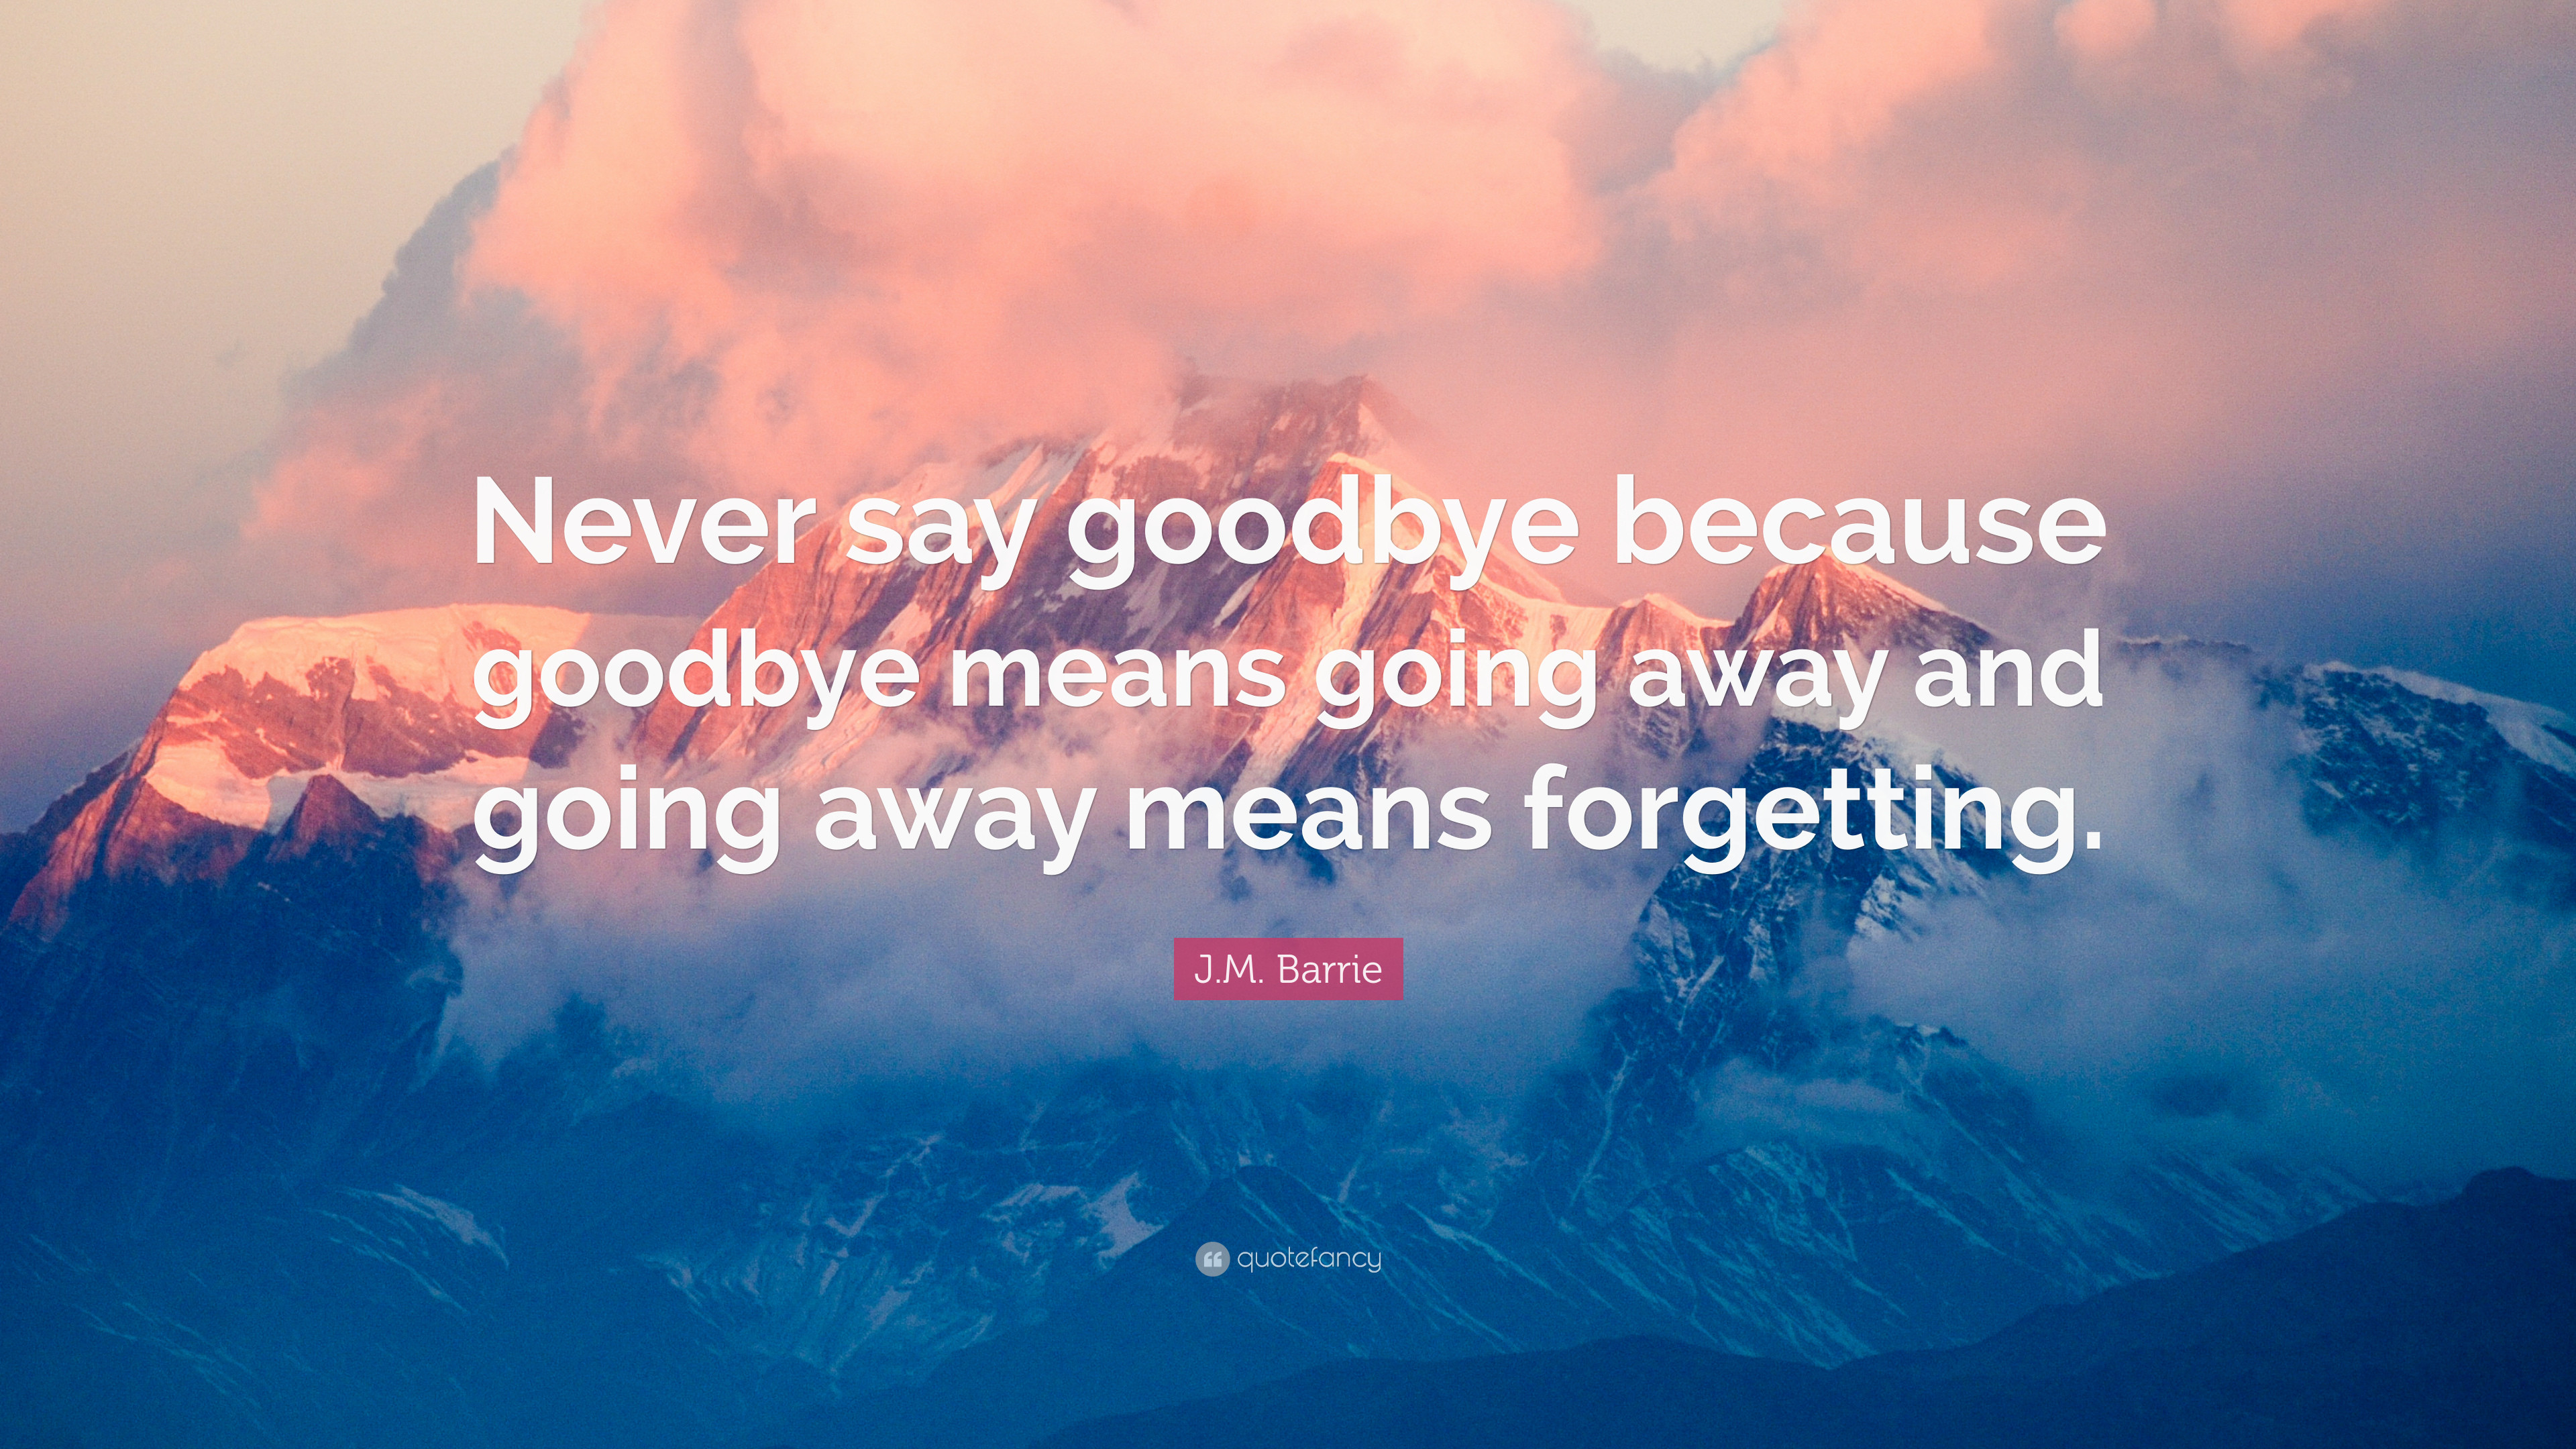 3840x2160 J.M. Barrie Quote: “Never say goodbye because goodbye means going away and  going away